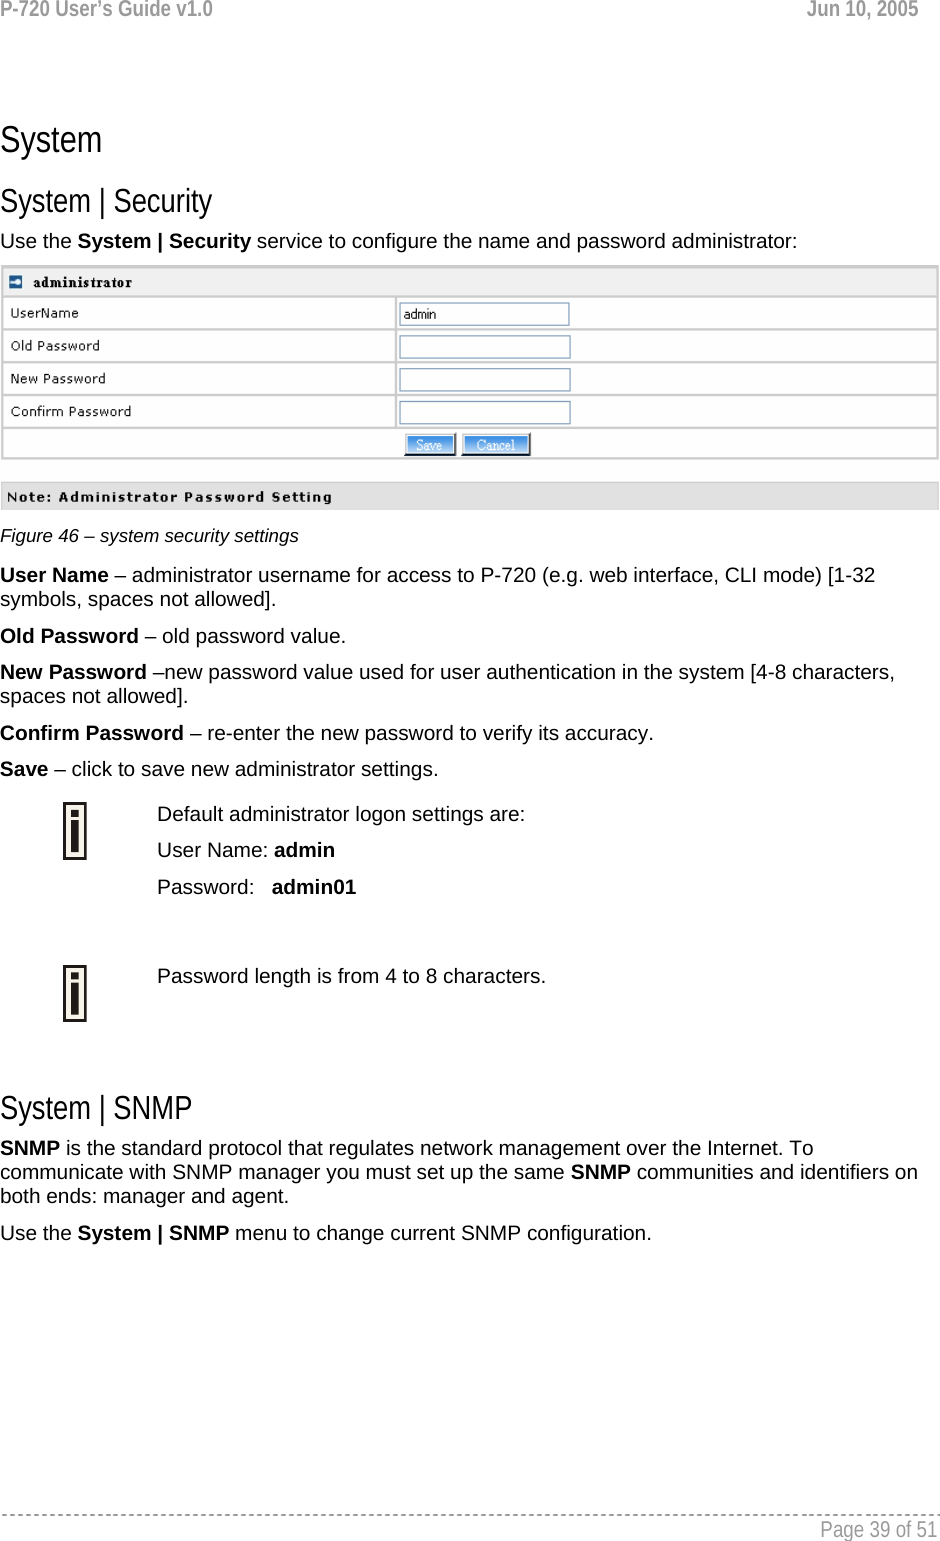 P-720 User’s Guide v1.0  Jun 10, 2005     Page 39 of 51    System System | Security Use the System | Security service to configure the name and password administrator:  Figure 46 – system security settings User Name – administrator username for access to P-720 (e.g. web interface, CLI mode) [1-32 symbols, spaces not allowed]. Old Password – old password value.   New Password –new password value used for user authentication in the system [4-8 characters, spaces not allowed]. Confirm Password – re-enter the new password to verify its accuracy. Save – click to save new administrator settings.  Default administrator logon settings are: User Name: admin Password:   admin01   Password length is from 4 to 8 characters.   System | SNMP SNMP is the standard protocol that regulates network management over the Internet. To communicate with SNMP manager you must set up the same SNMP communities and identifiers on both ends: manager and agent. Use the System | SNMP menu to change current SNMP configuration. 